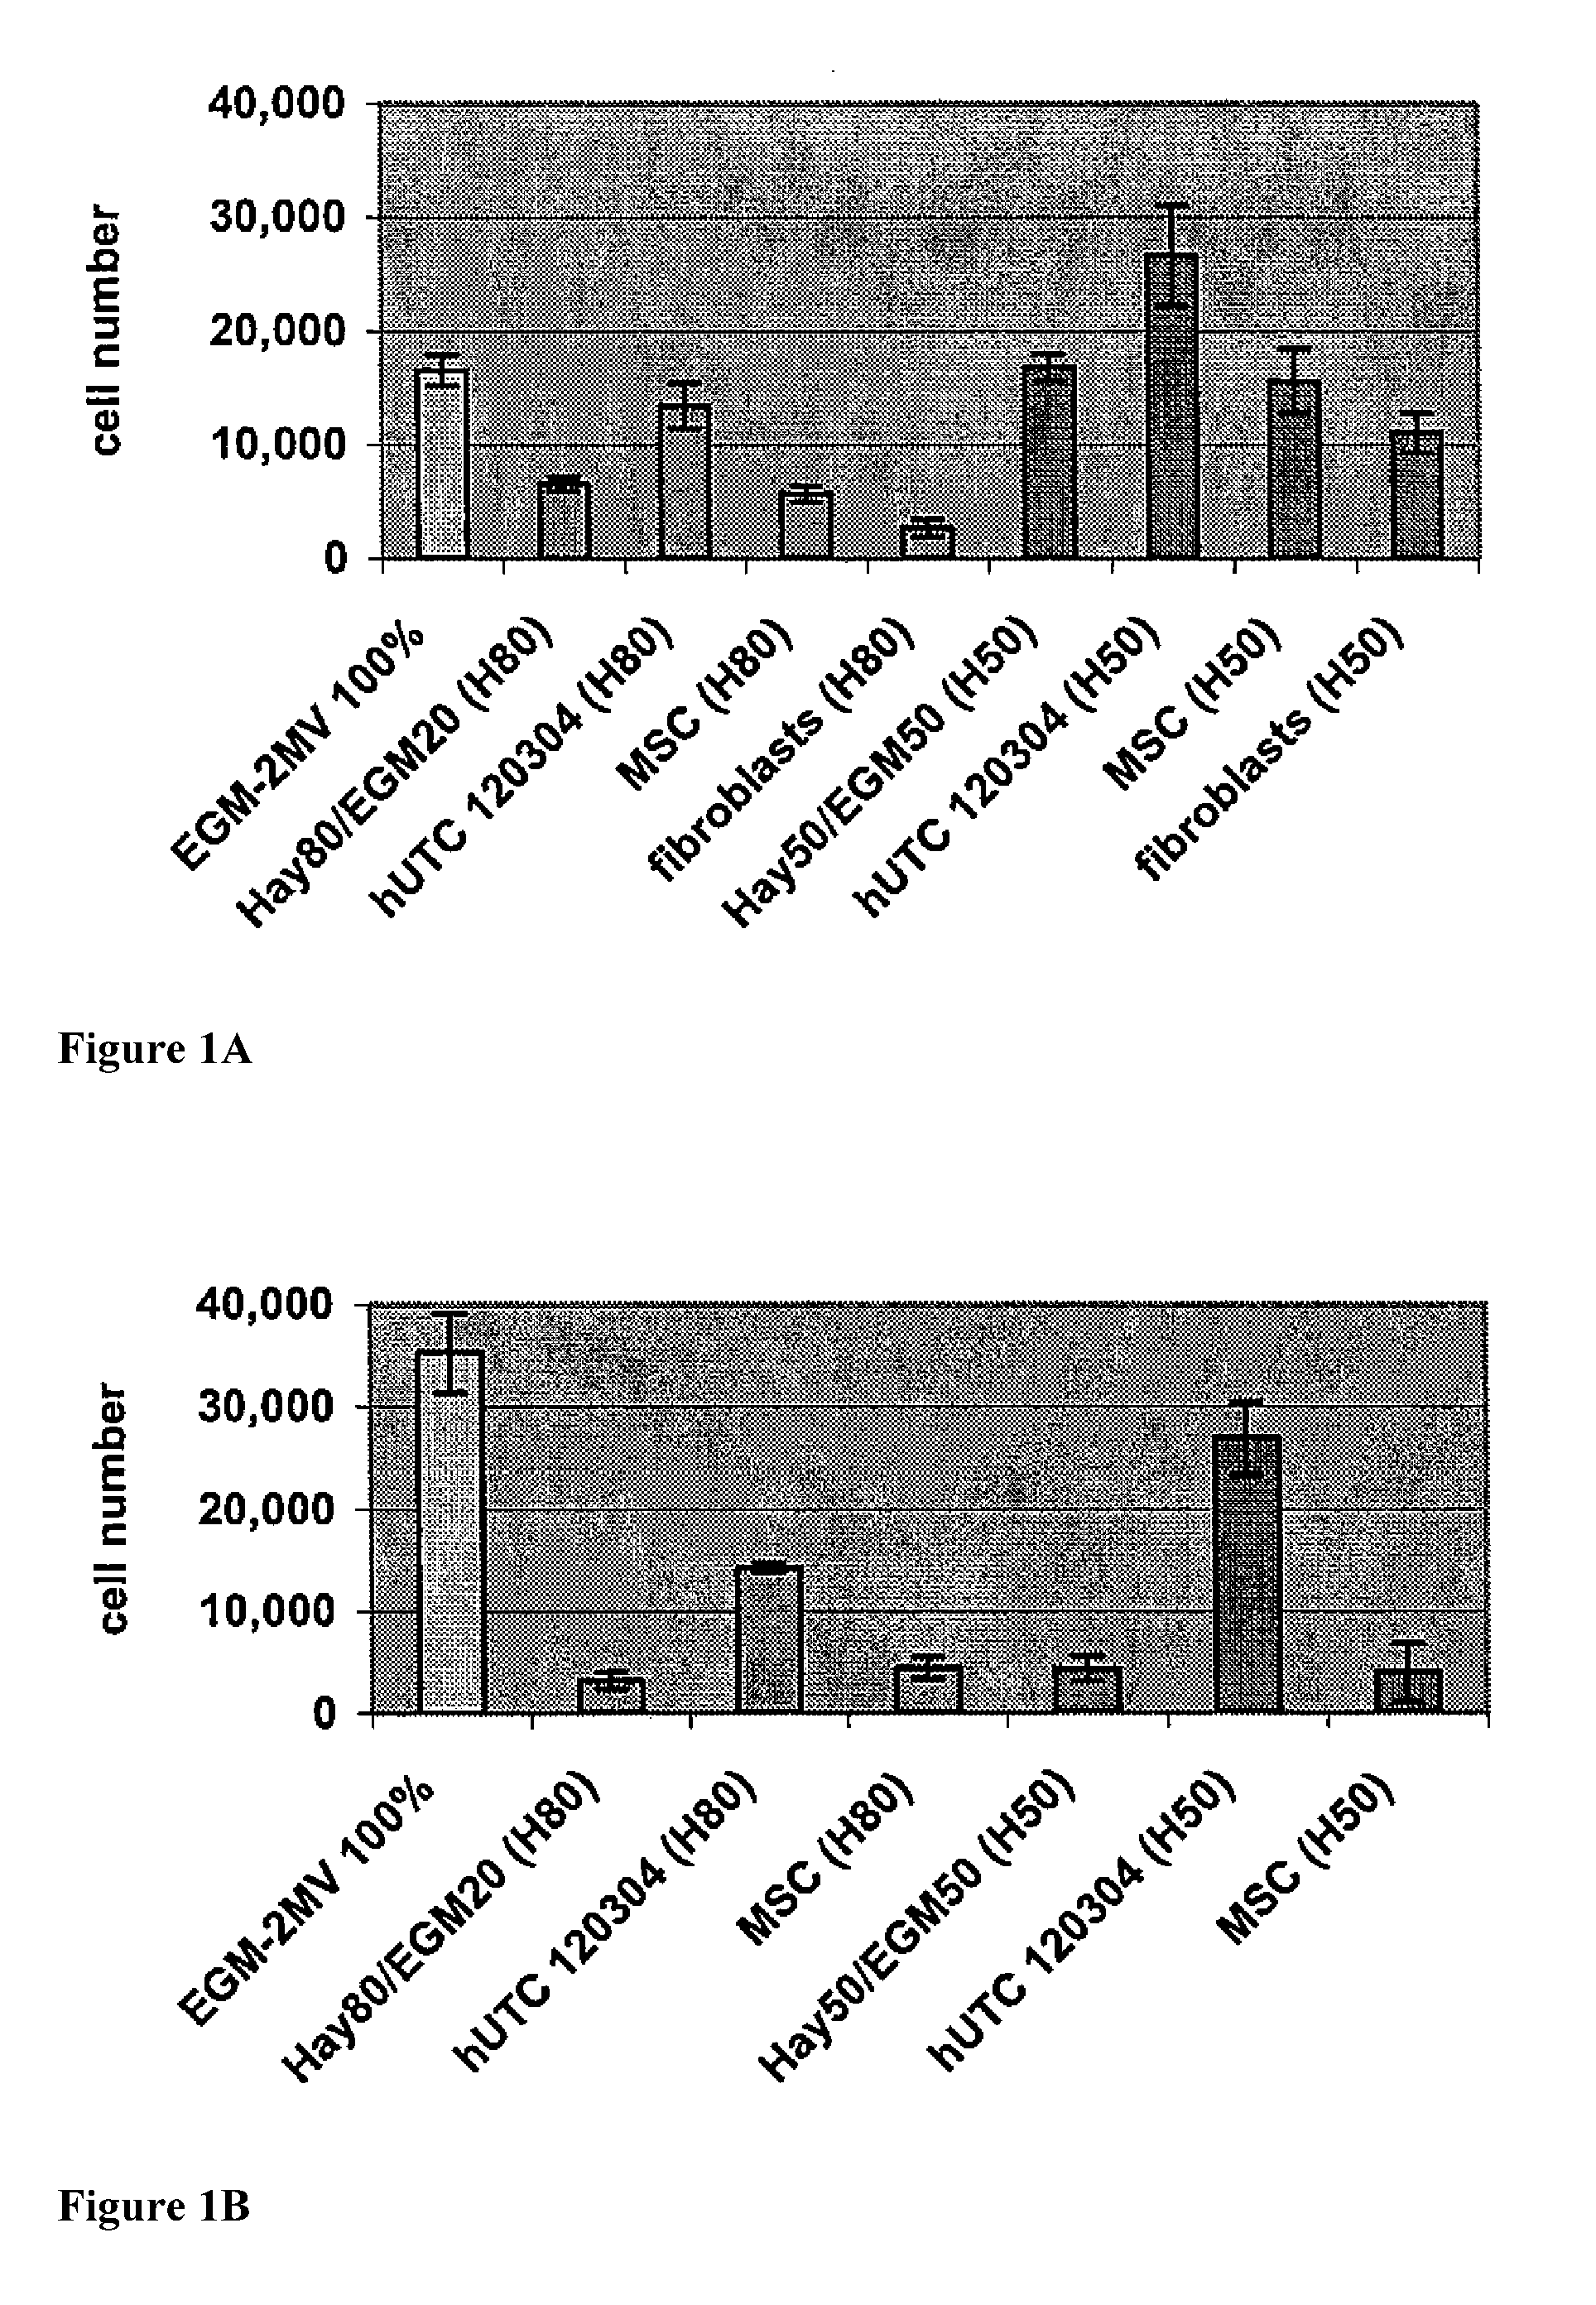 Treatment of peripheral vascular disease using umbilical cord tissue-derived cells